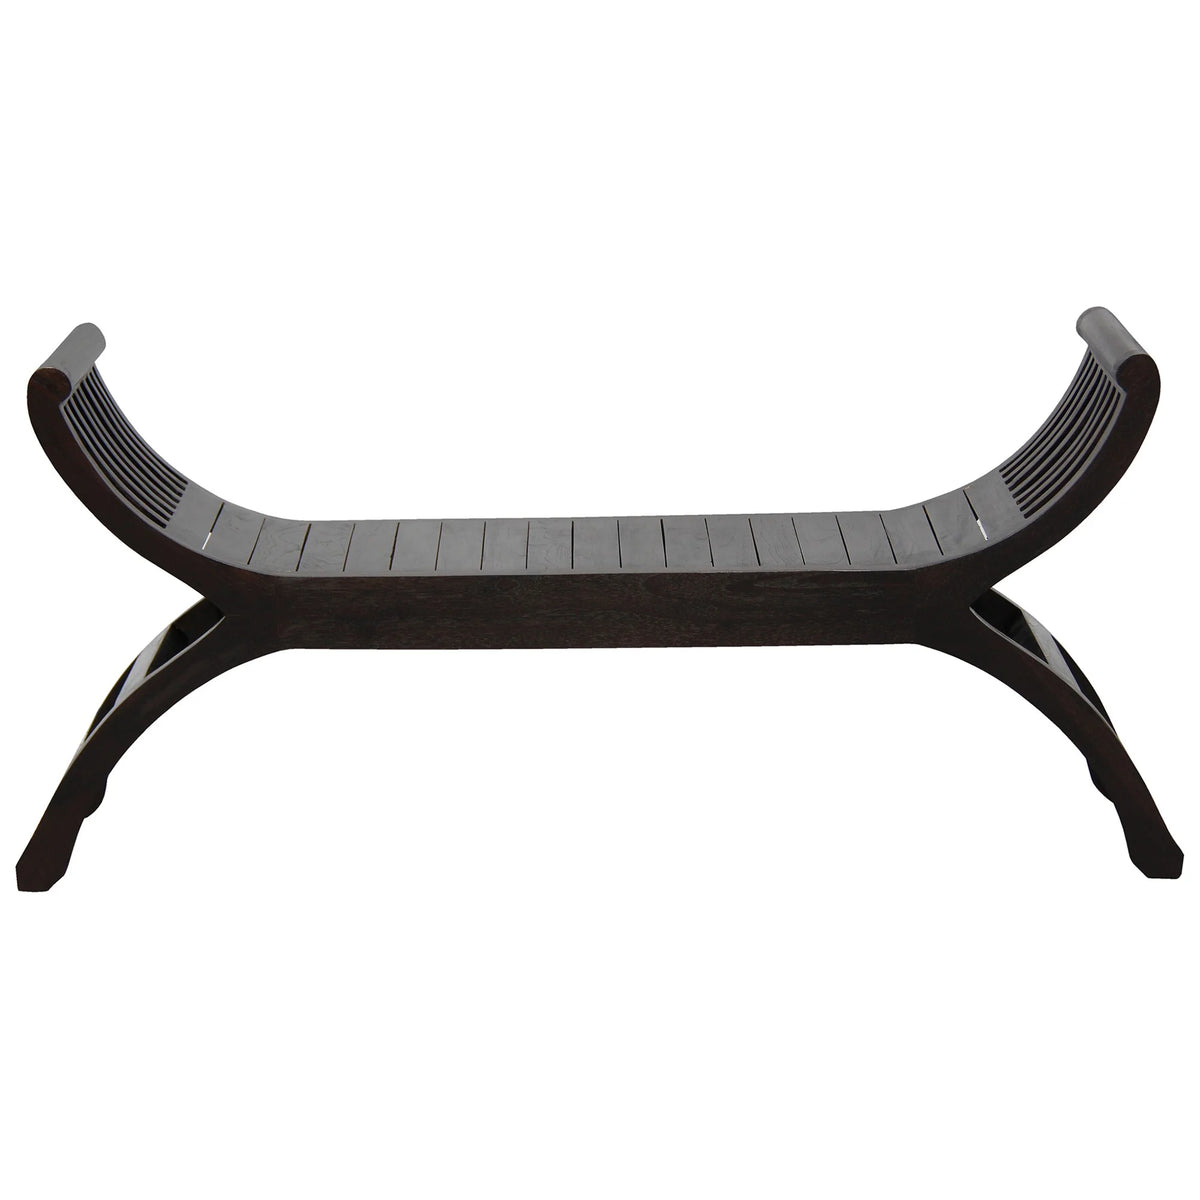 Maeve Solid Mahogany Timber Curved Bench in Chocolate - 130cm - Notbrand